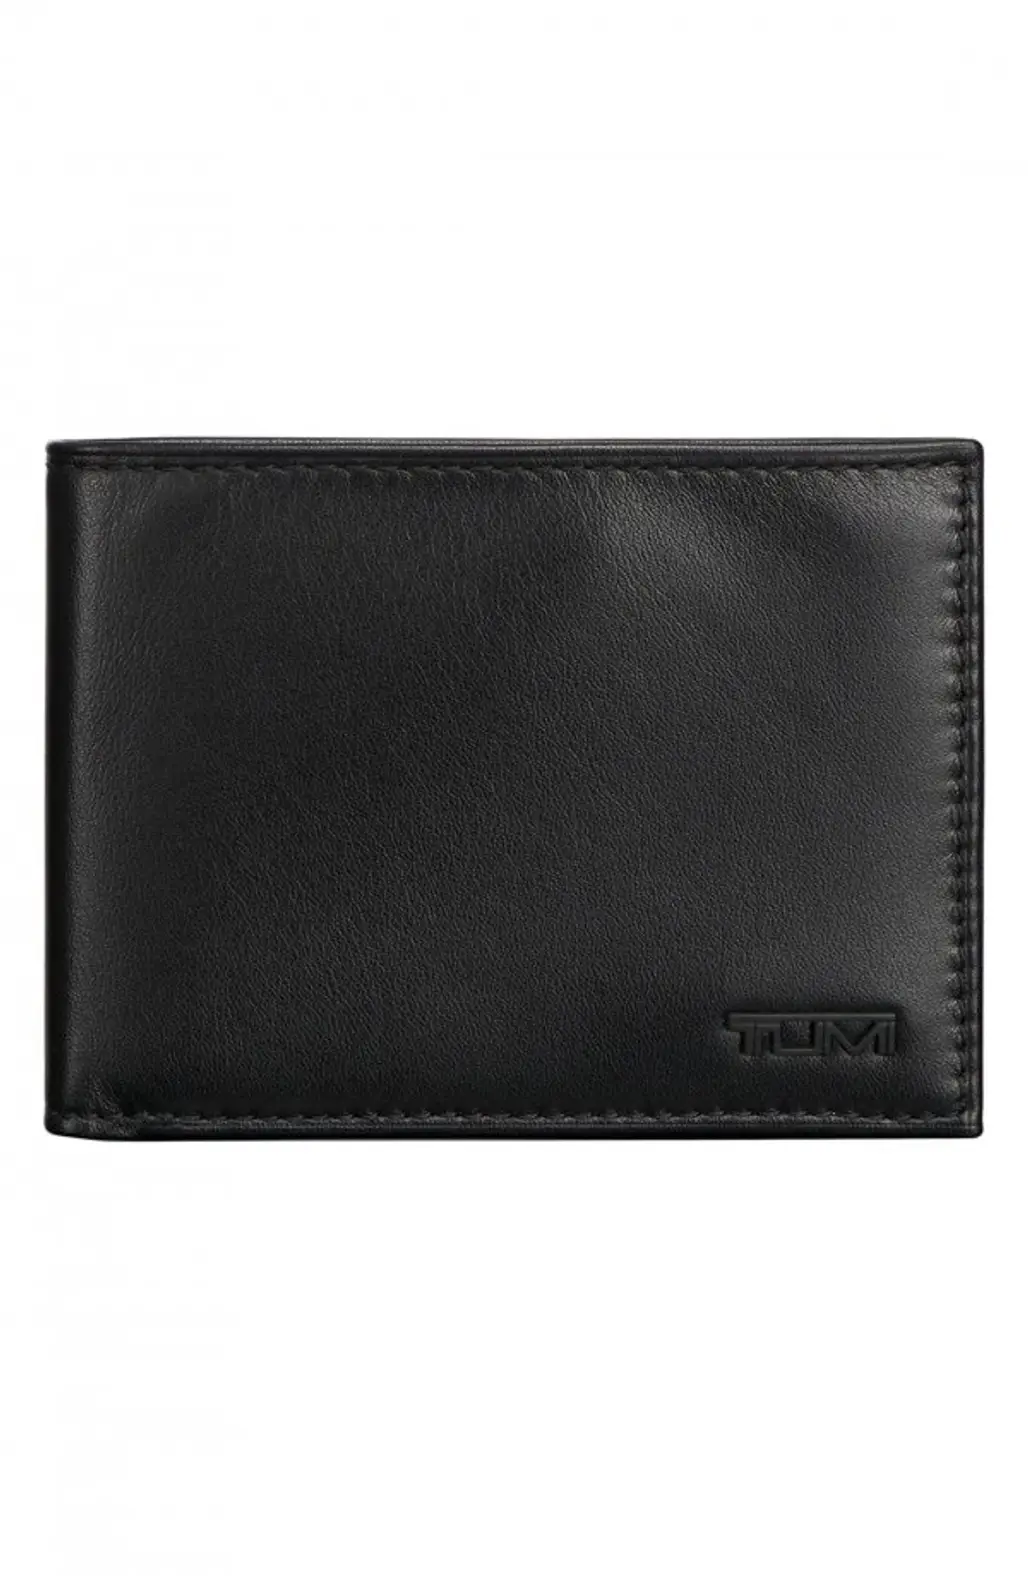 wallet, fashion accessory, leather, bag, brand,